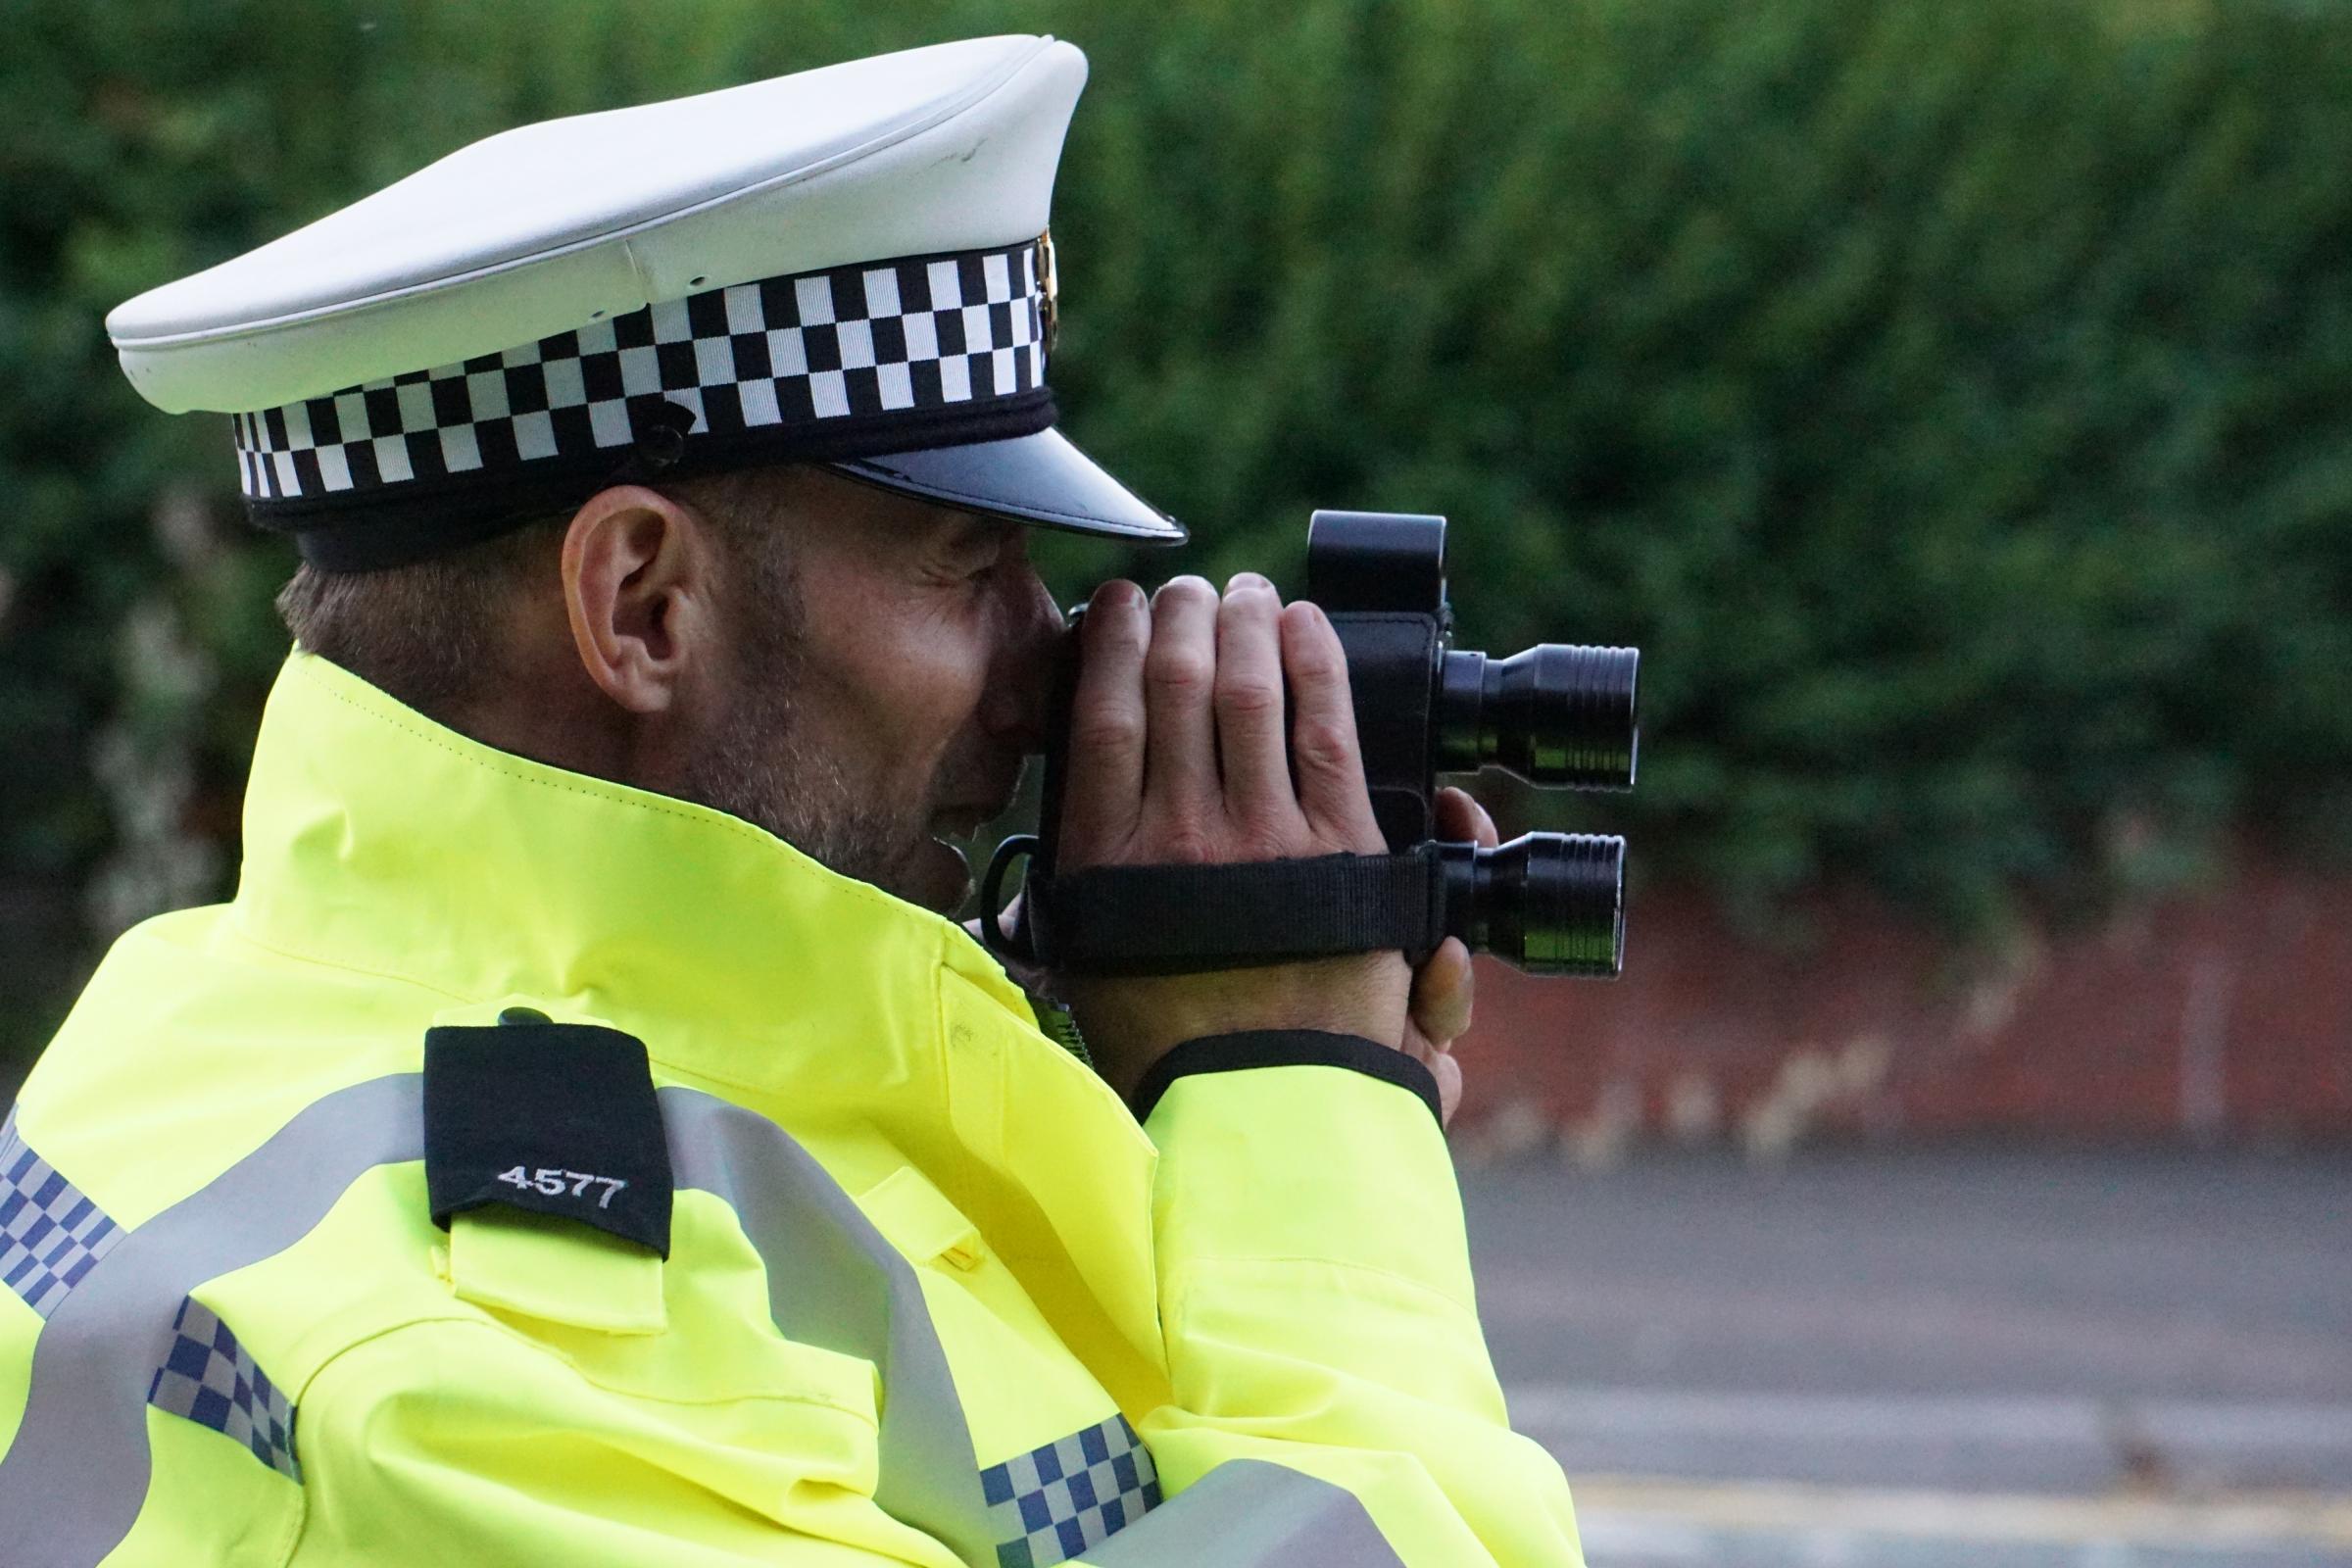 Bexley Audi driver in court for speeding on the A30 London Road